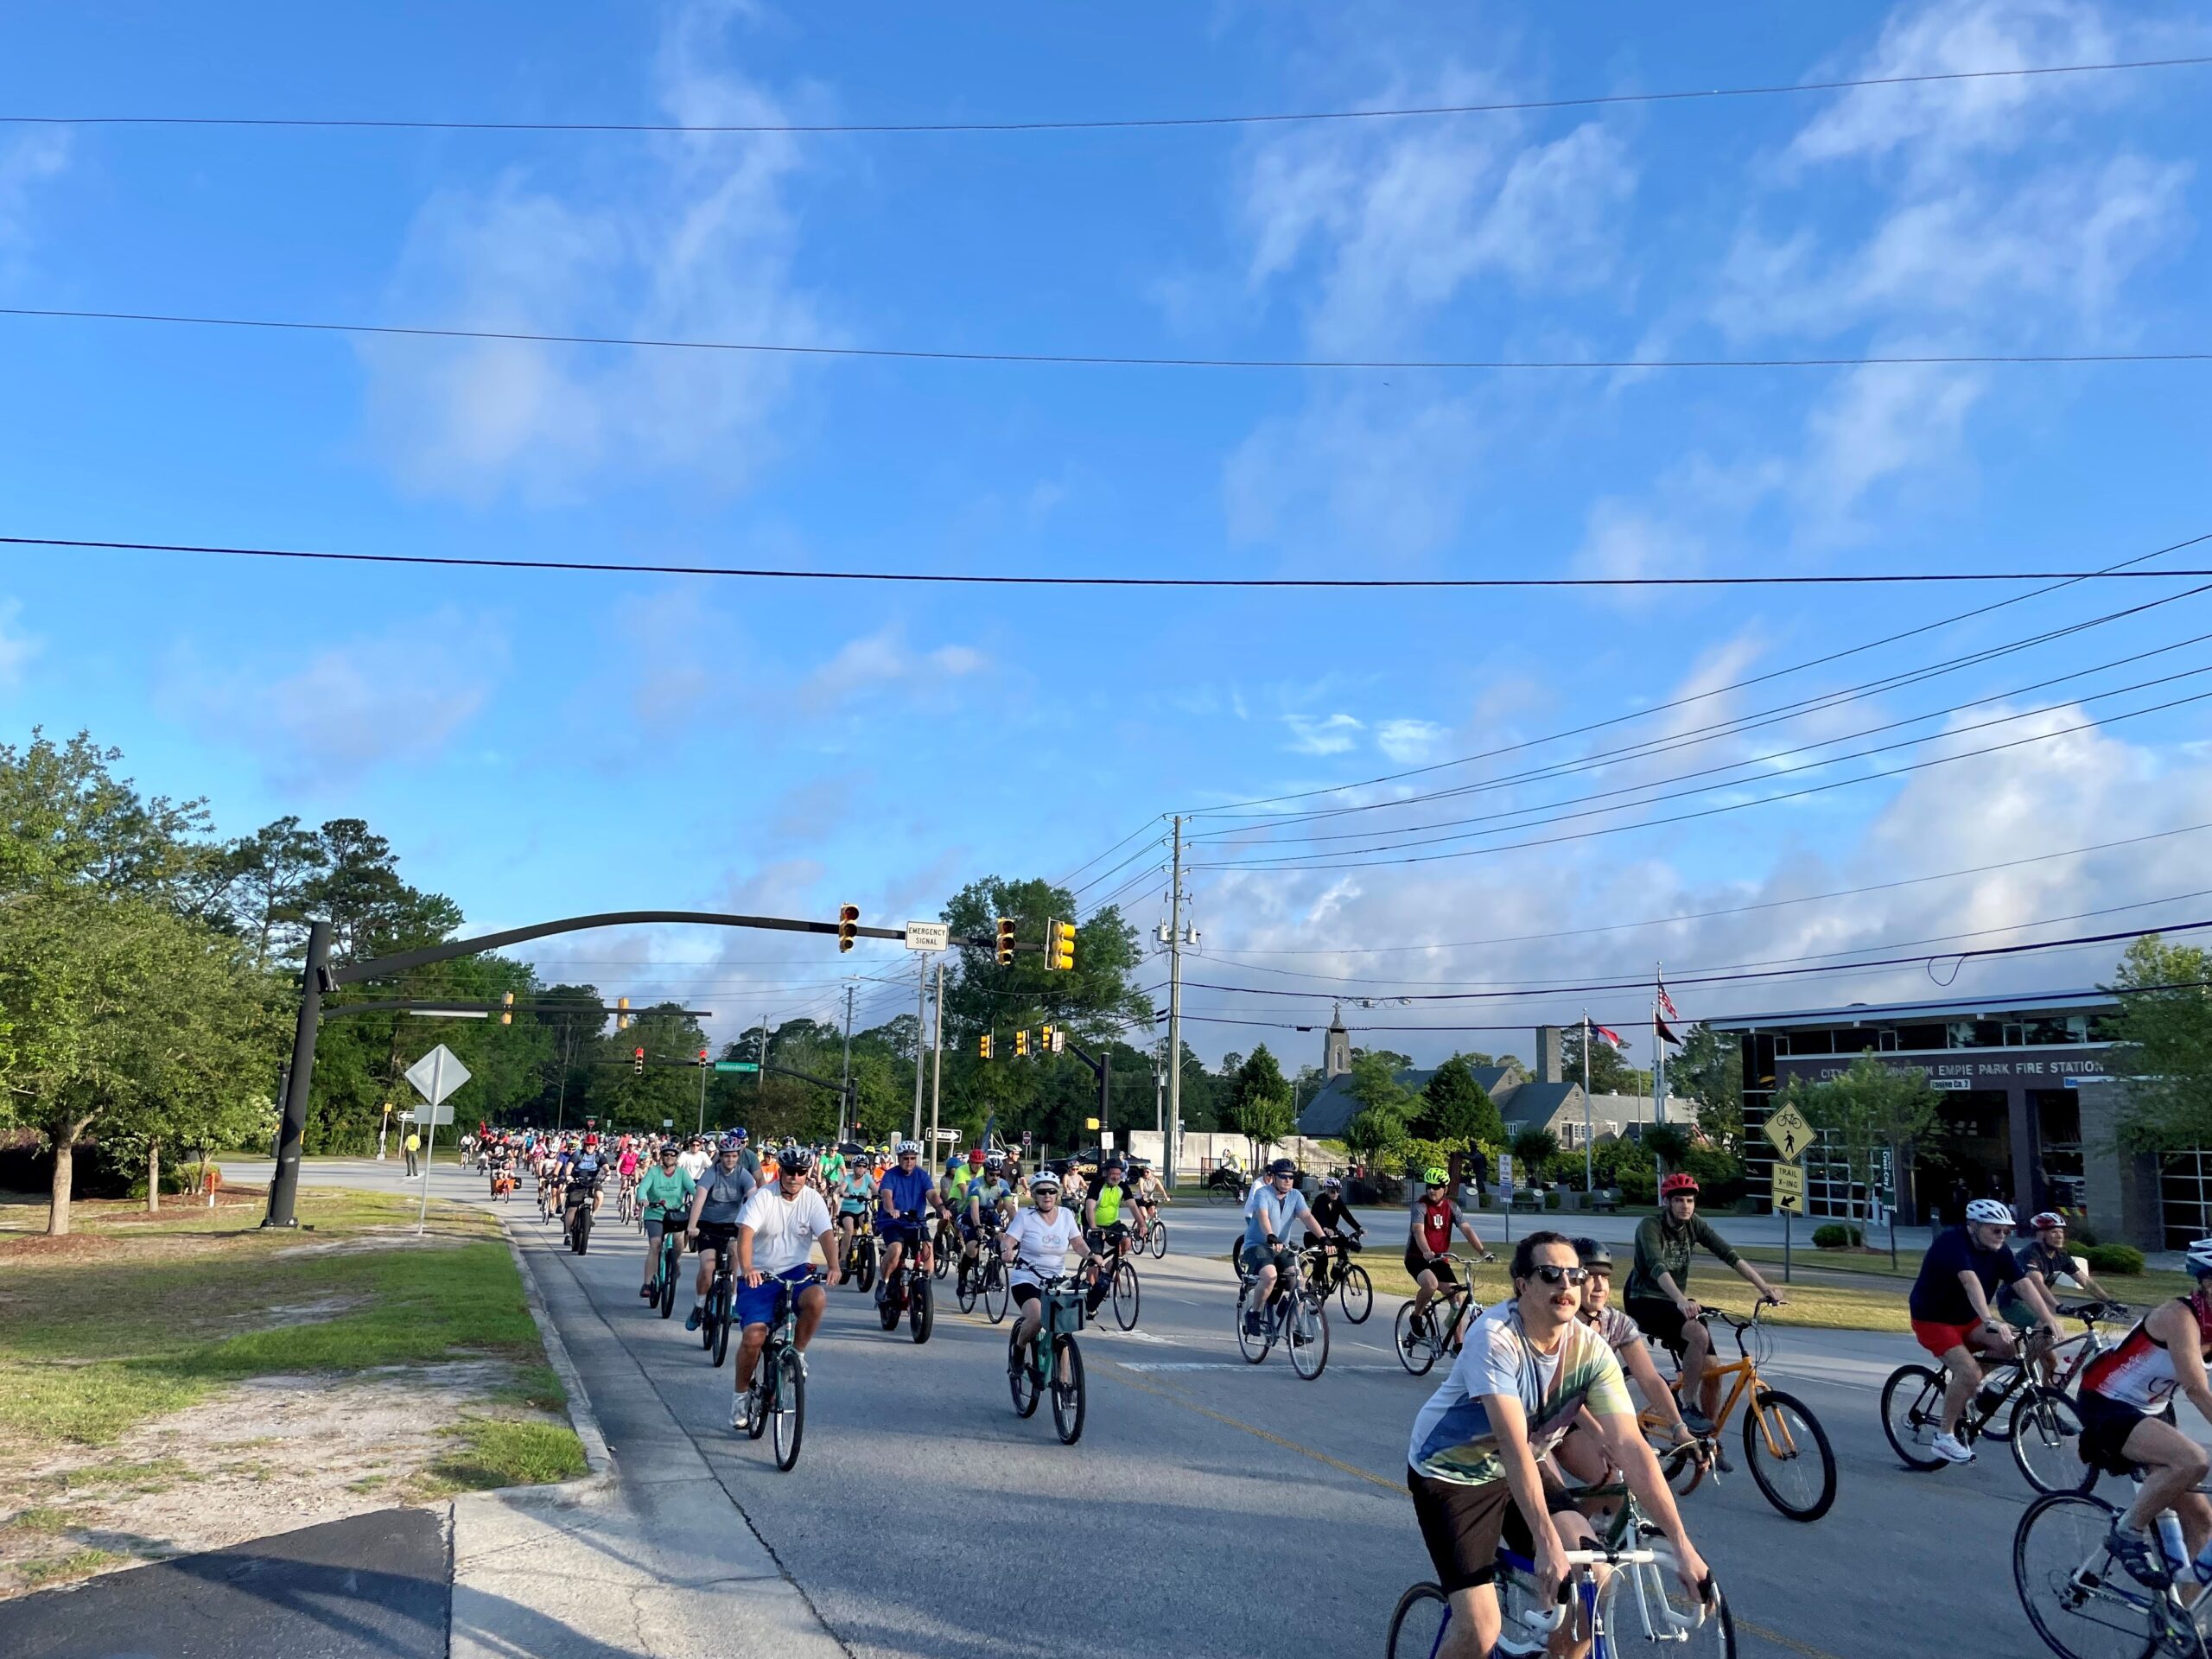 50+ bicycle riders in the 2022 River to Sea Bike Ride on Independence Blvd.